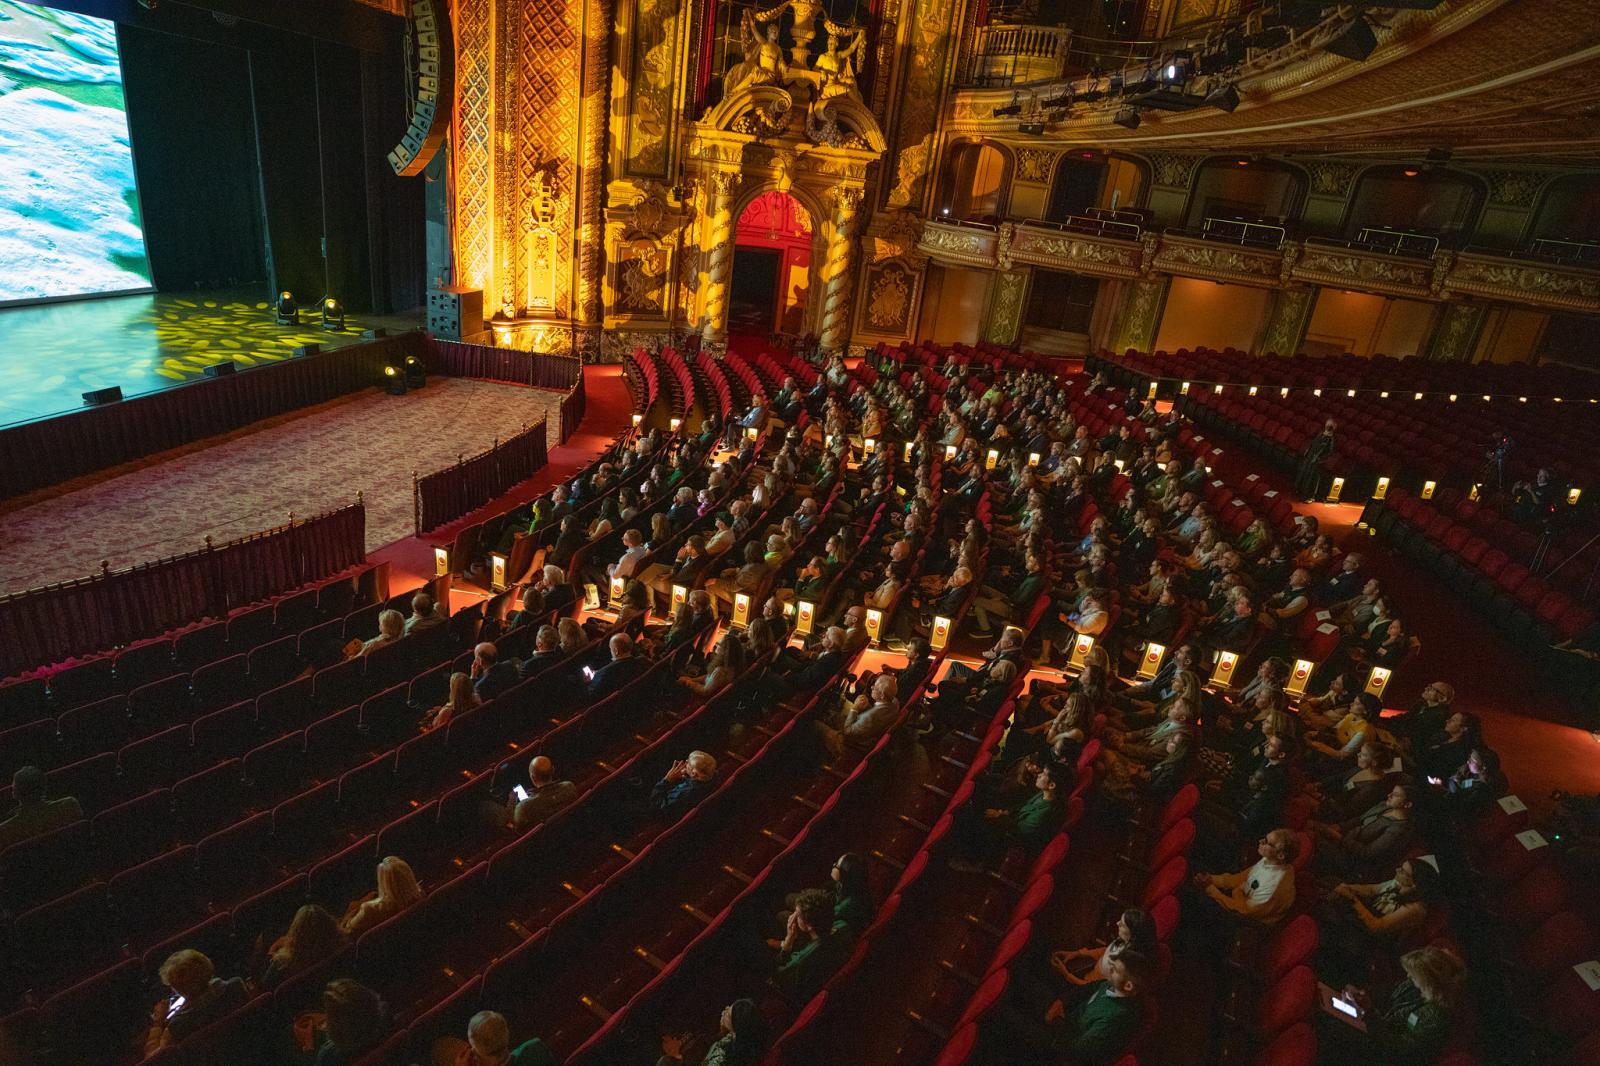 Aerial shot of a crowded theater hall